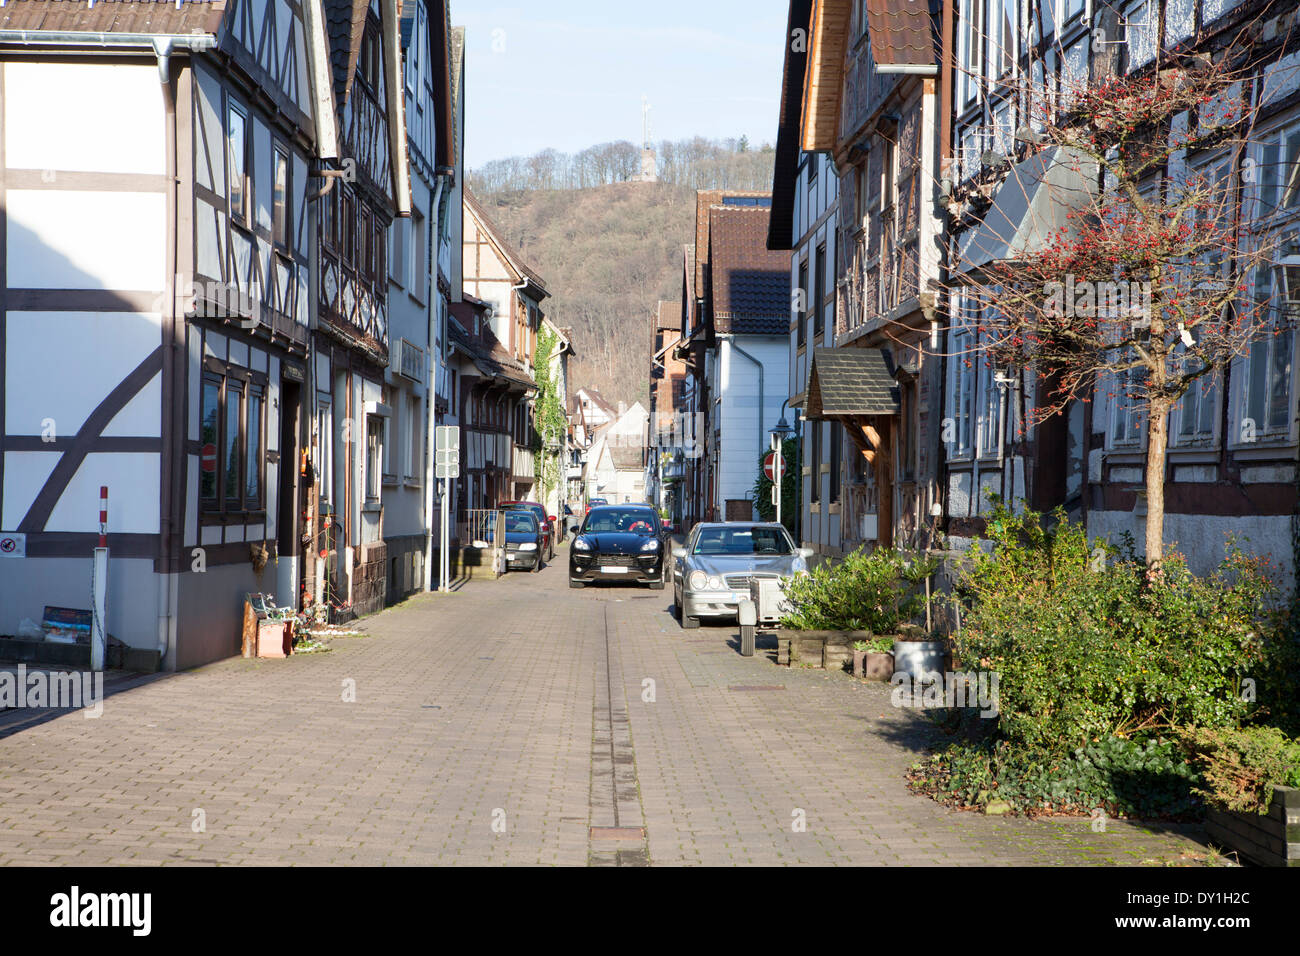 Street in Bodenwerder, Baron Muenchhausen town, Weserbergland, Lower Saxony, Germany Stock Photo